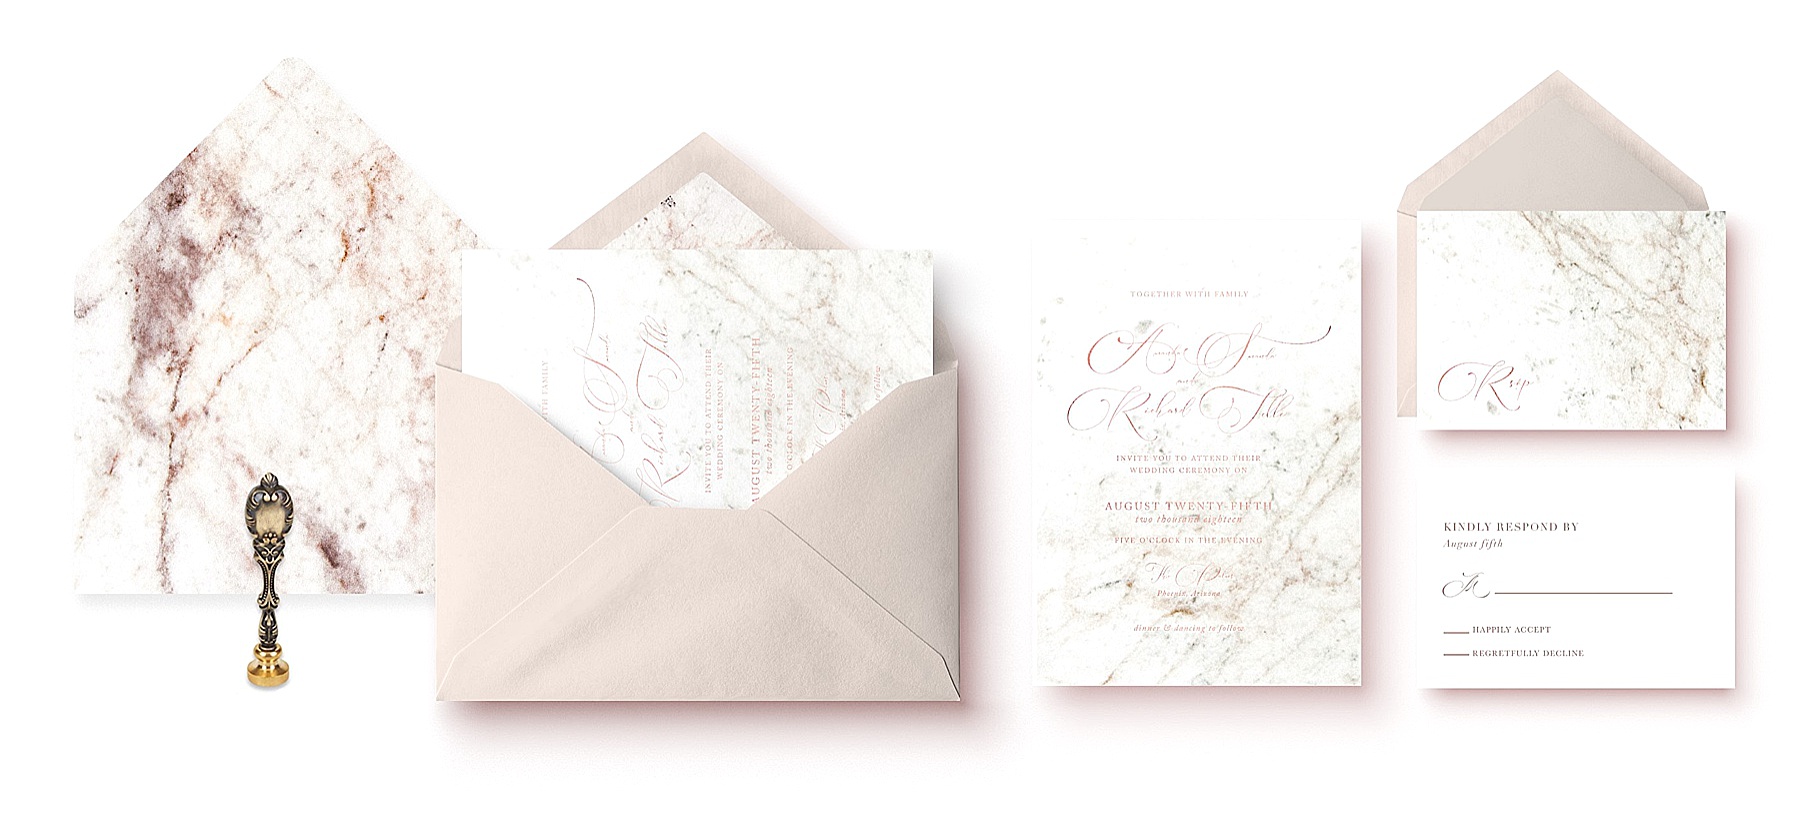 foil-and-ink-custom-invitation-a-walk-in-rome-tan-marble